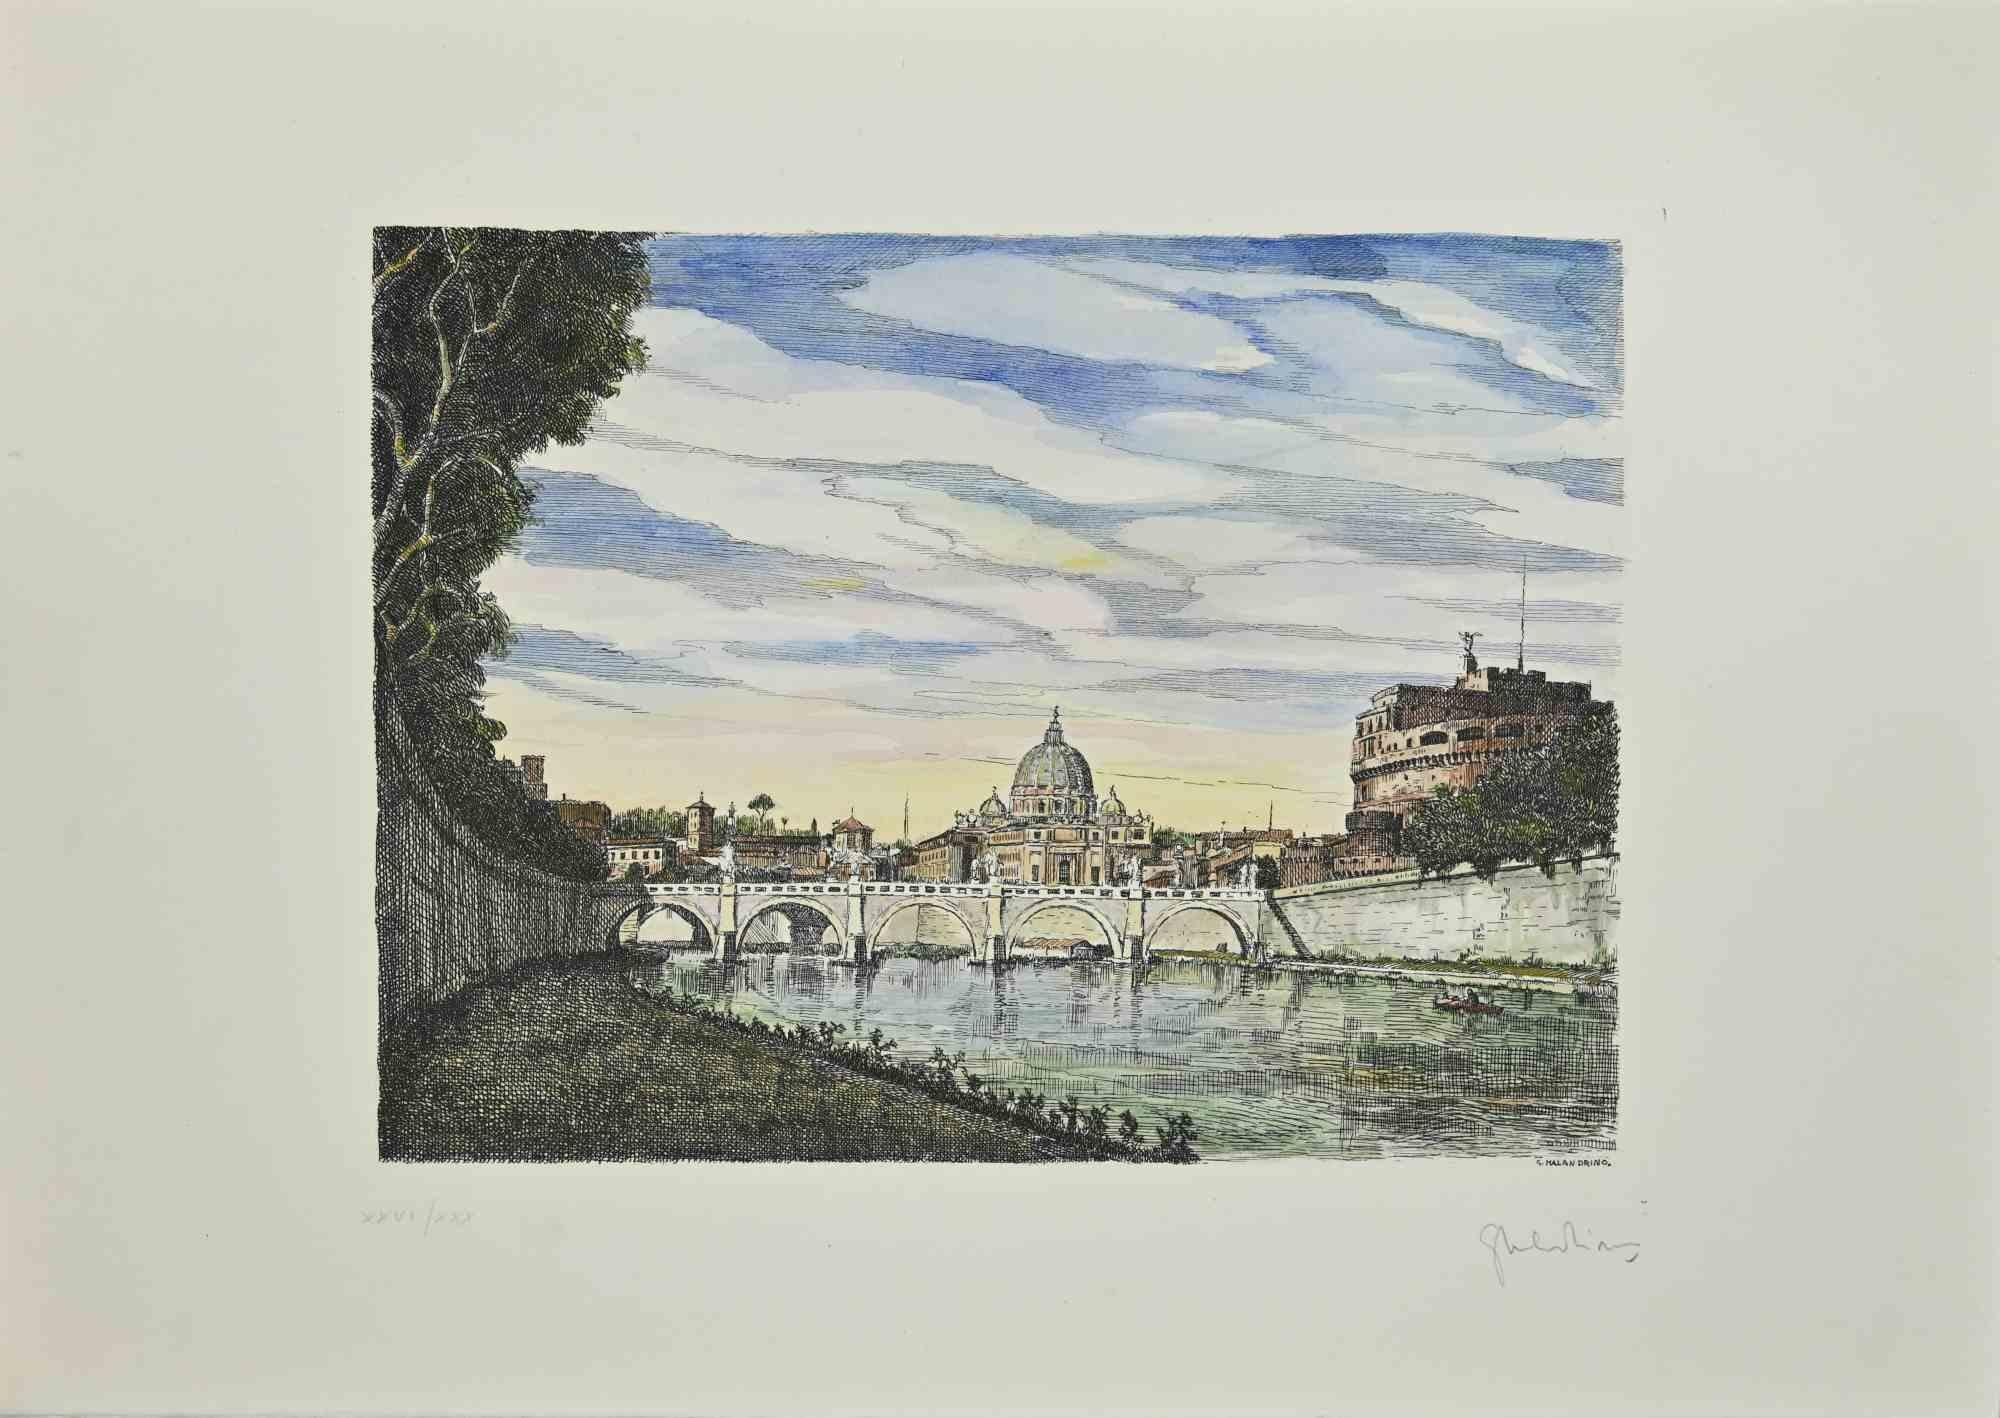 Saint Peter and Castel Sant'Angelo is an artwork realized by Giuseppe Malandrino.

Mixed colored etching

Hand-signed by the artist in pencil on the lower right corner.

Numbered edition of XXVI/XXXcopies.

This artwork represents the beautiful